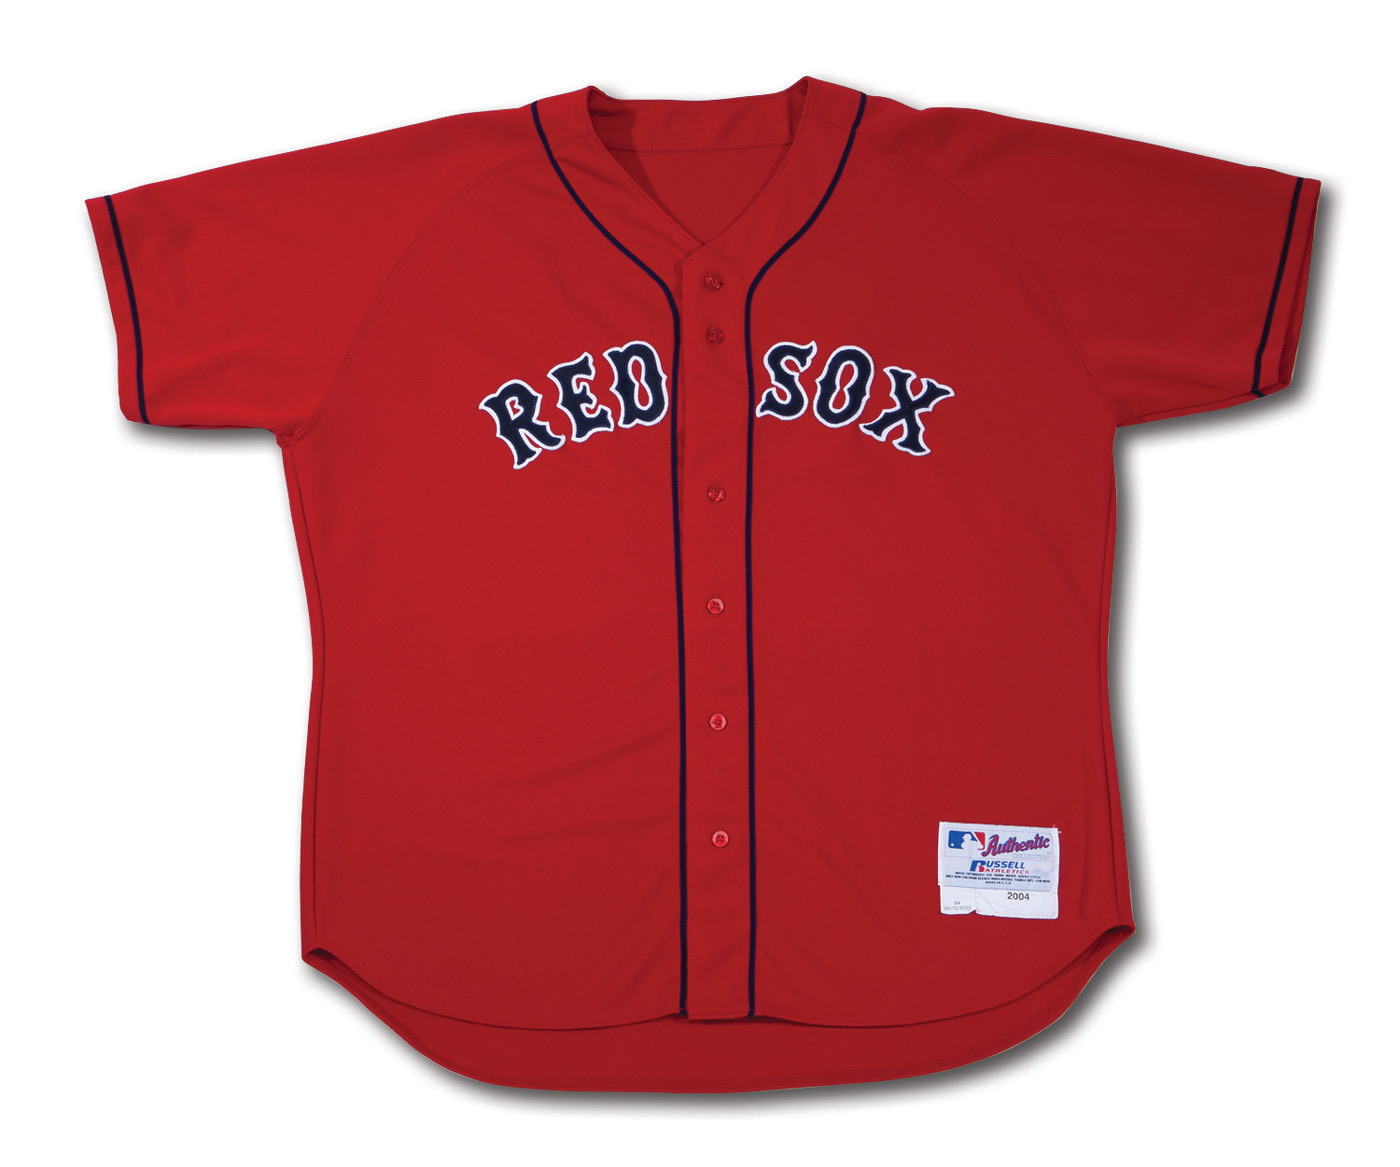 2005 Opening Day Boston Red Sox - Manny Ramirez Game-Issued Home Jersey  (feat. Gold Trimmed Identifiers & World Series Victory Patch)